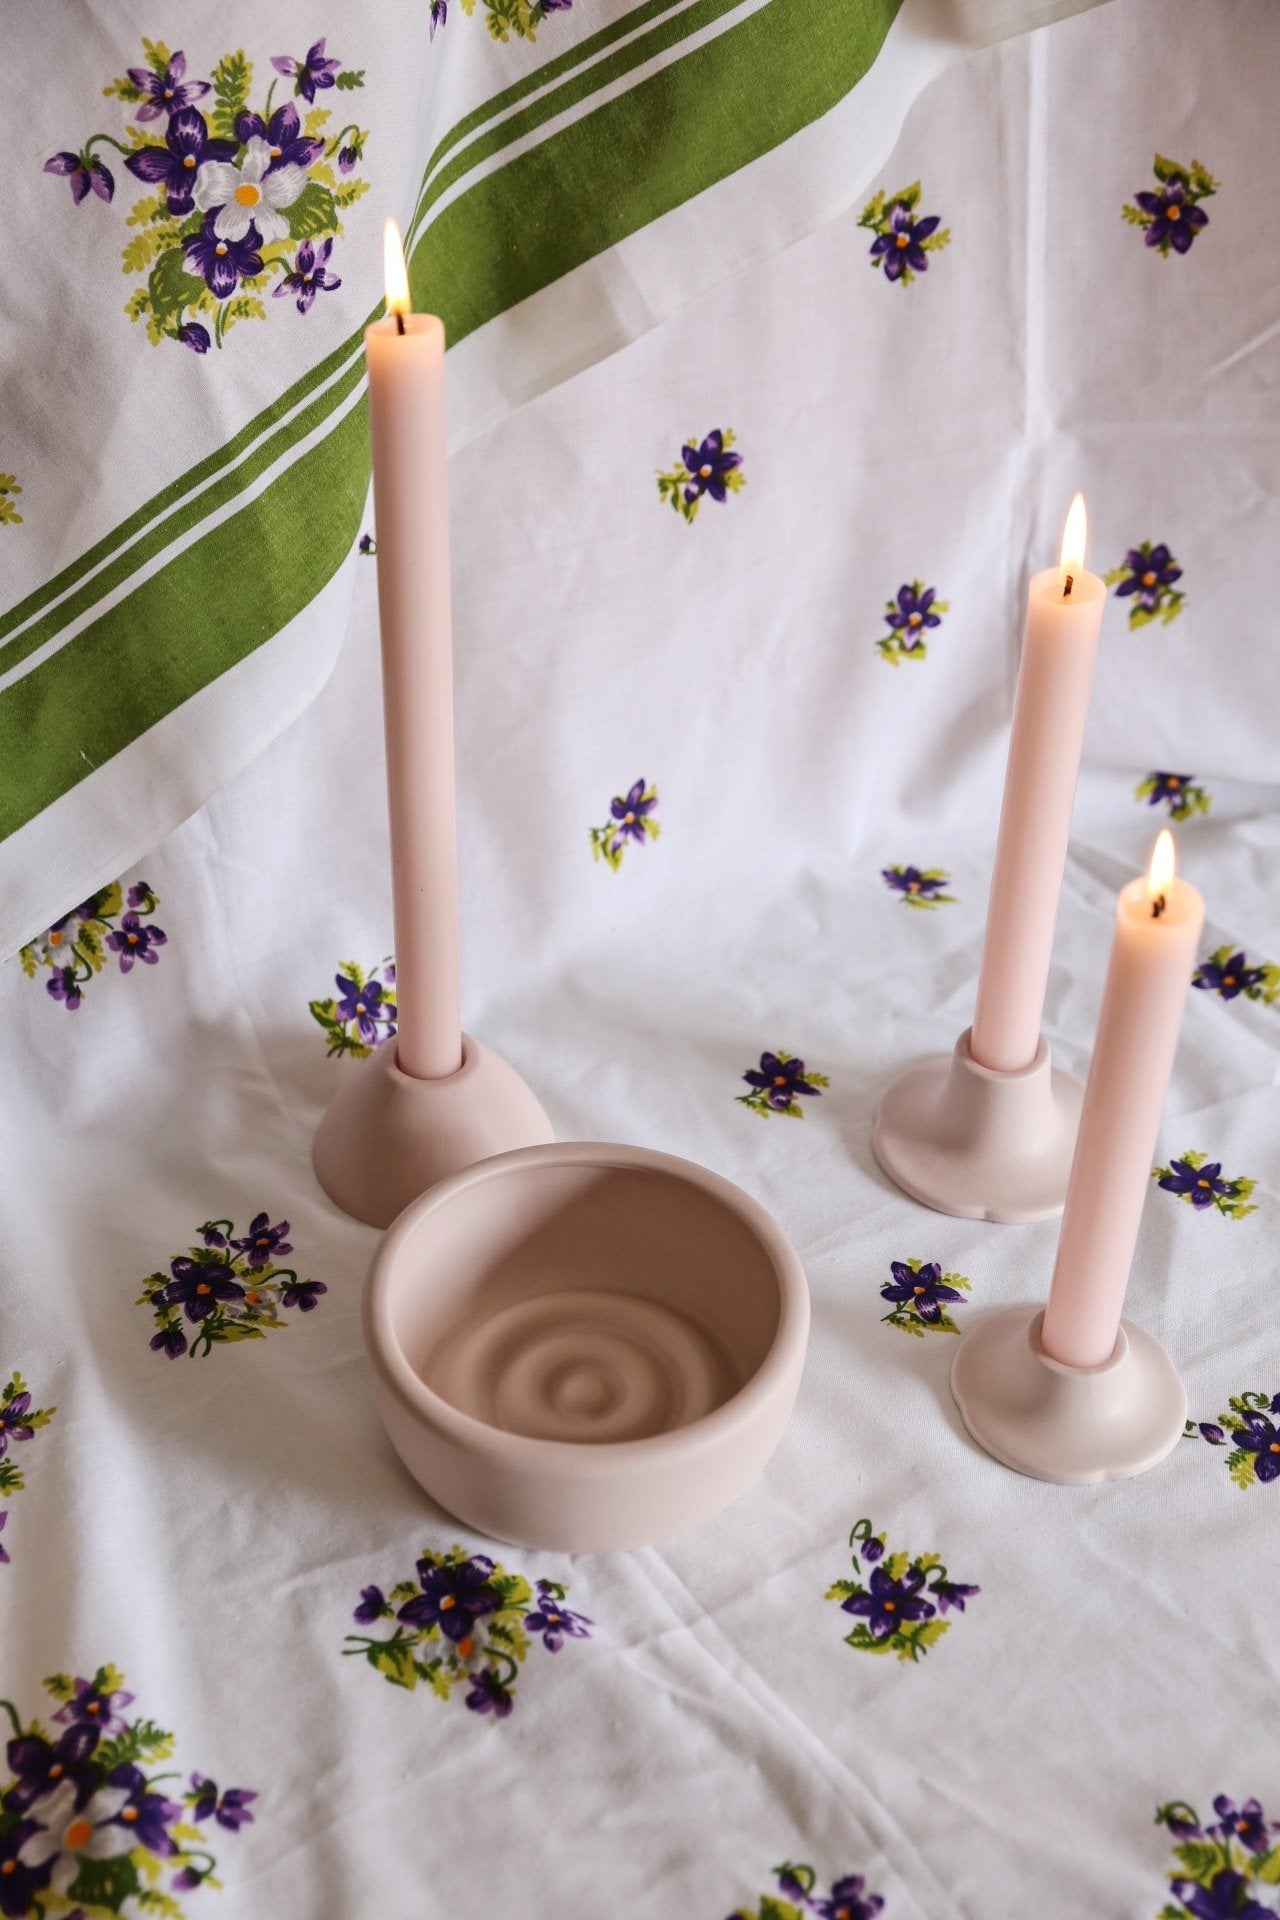 blush dinner candle holder with candles and round ceramic bowl